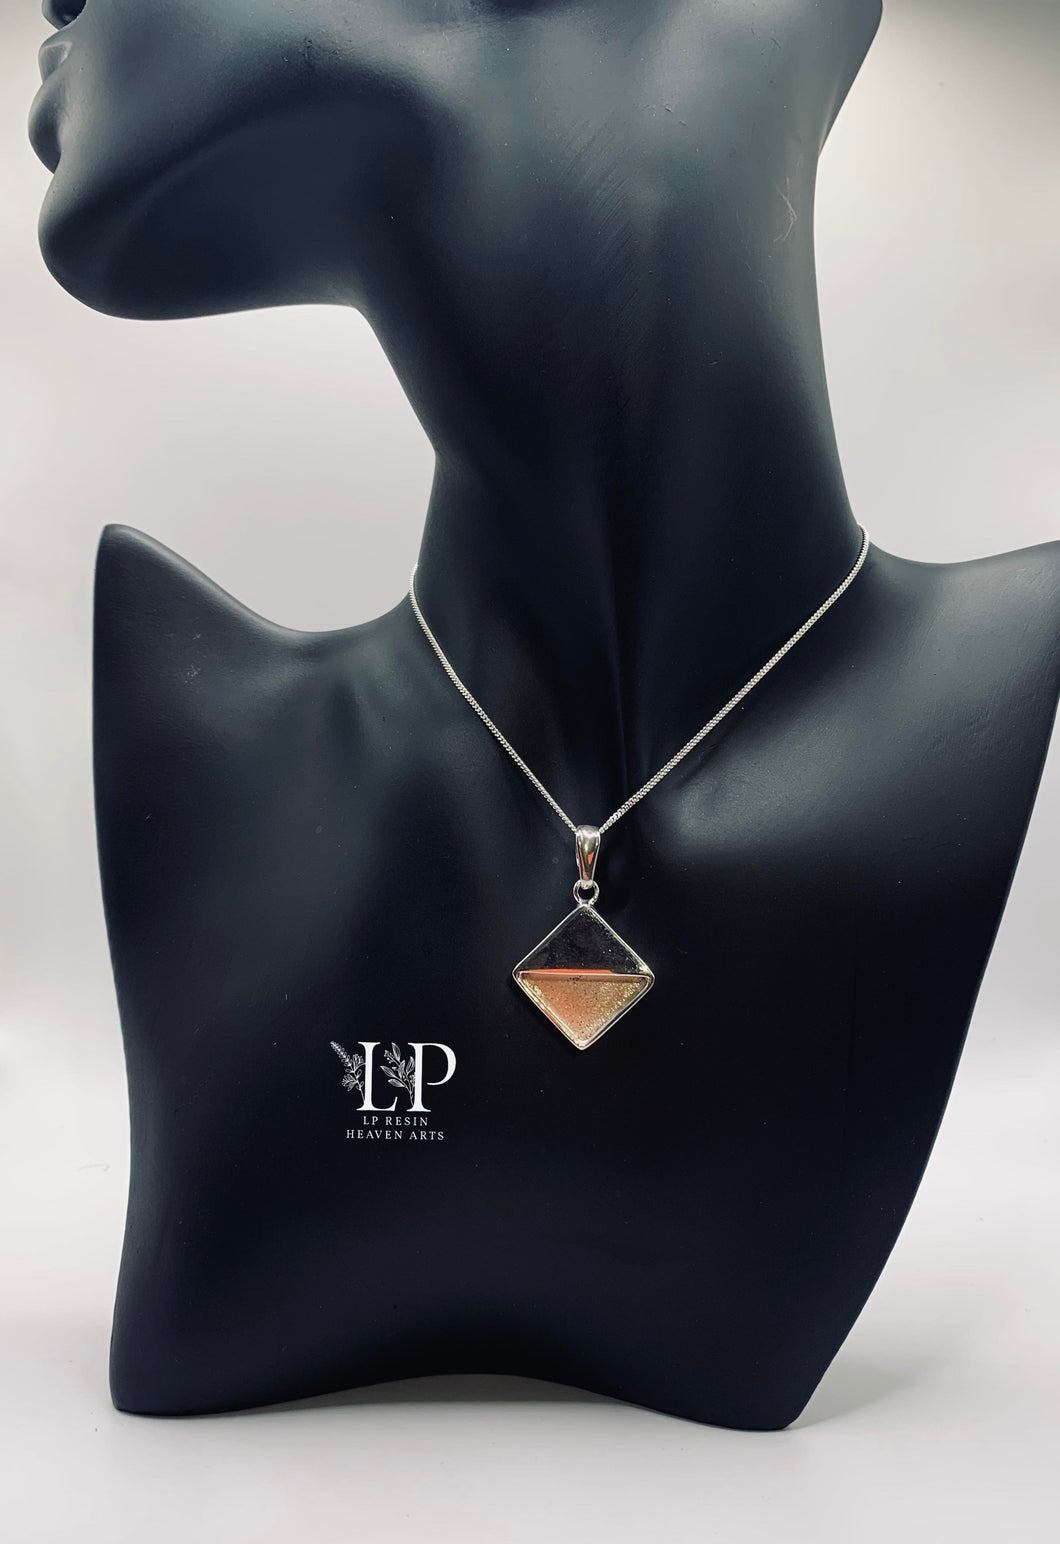 SPECIAL OFFER- Heavy open square pendant in silver